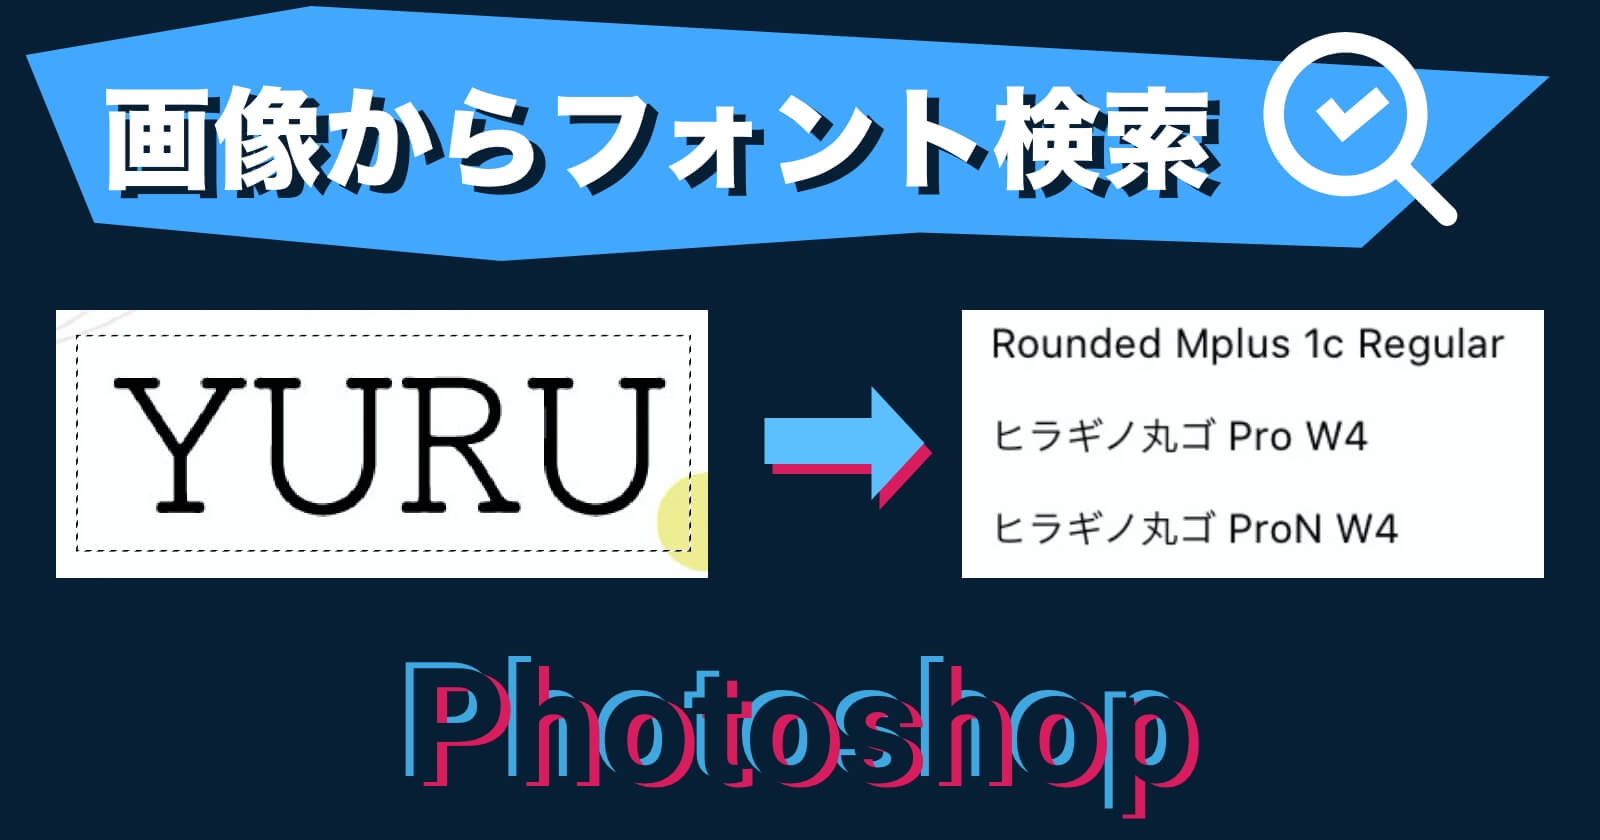 【Photoshop神機能】文字画像からフォントを検索する方法のサムネイル画像